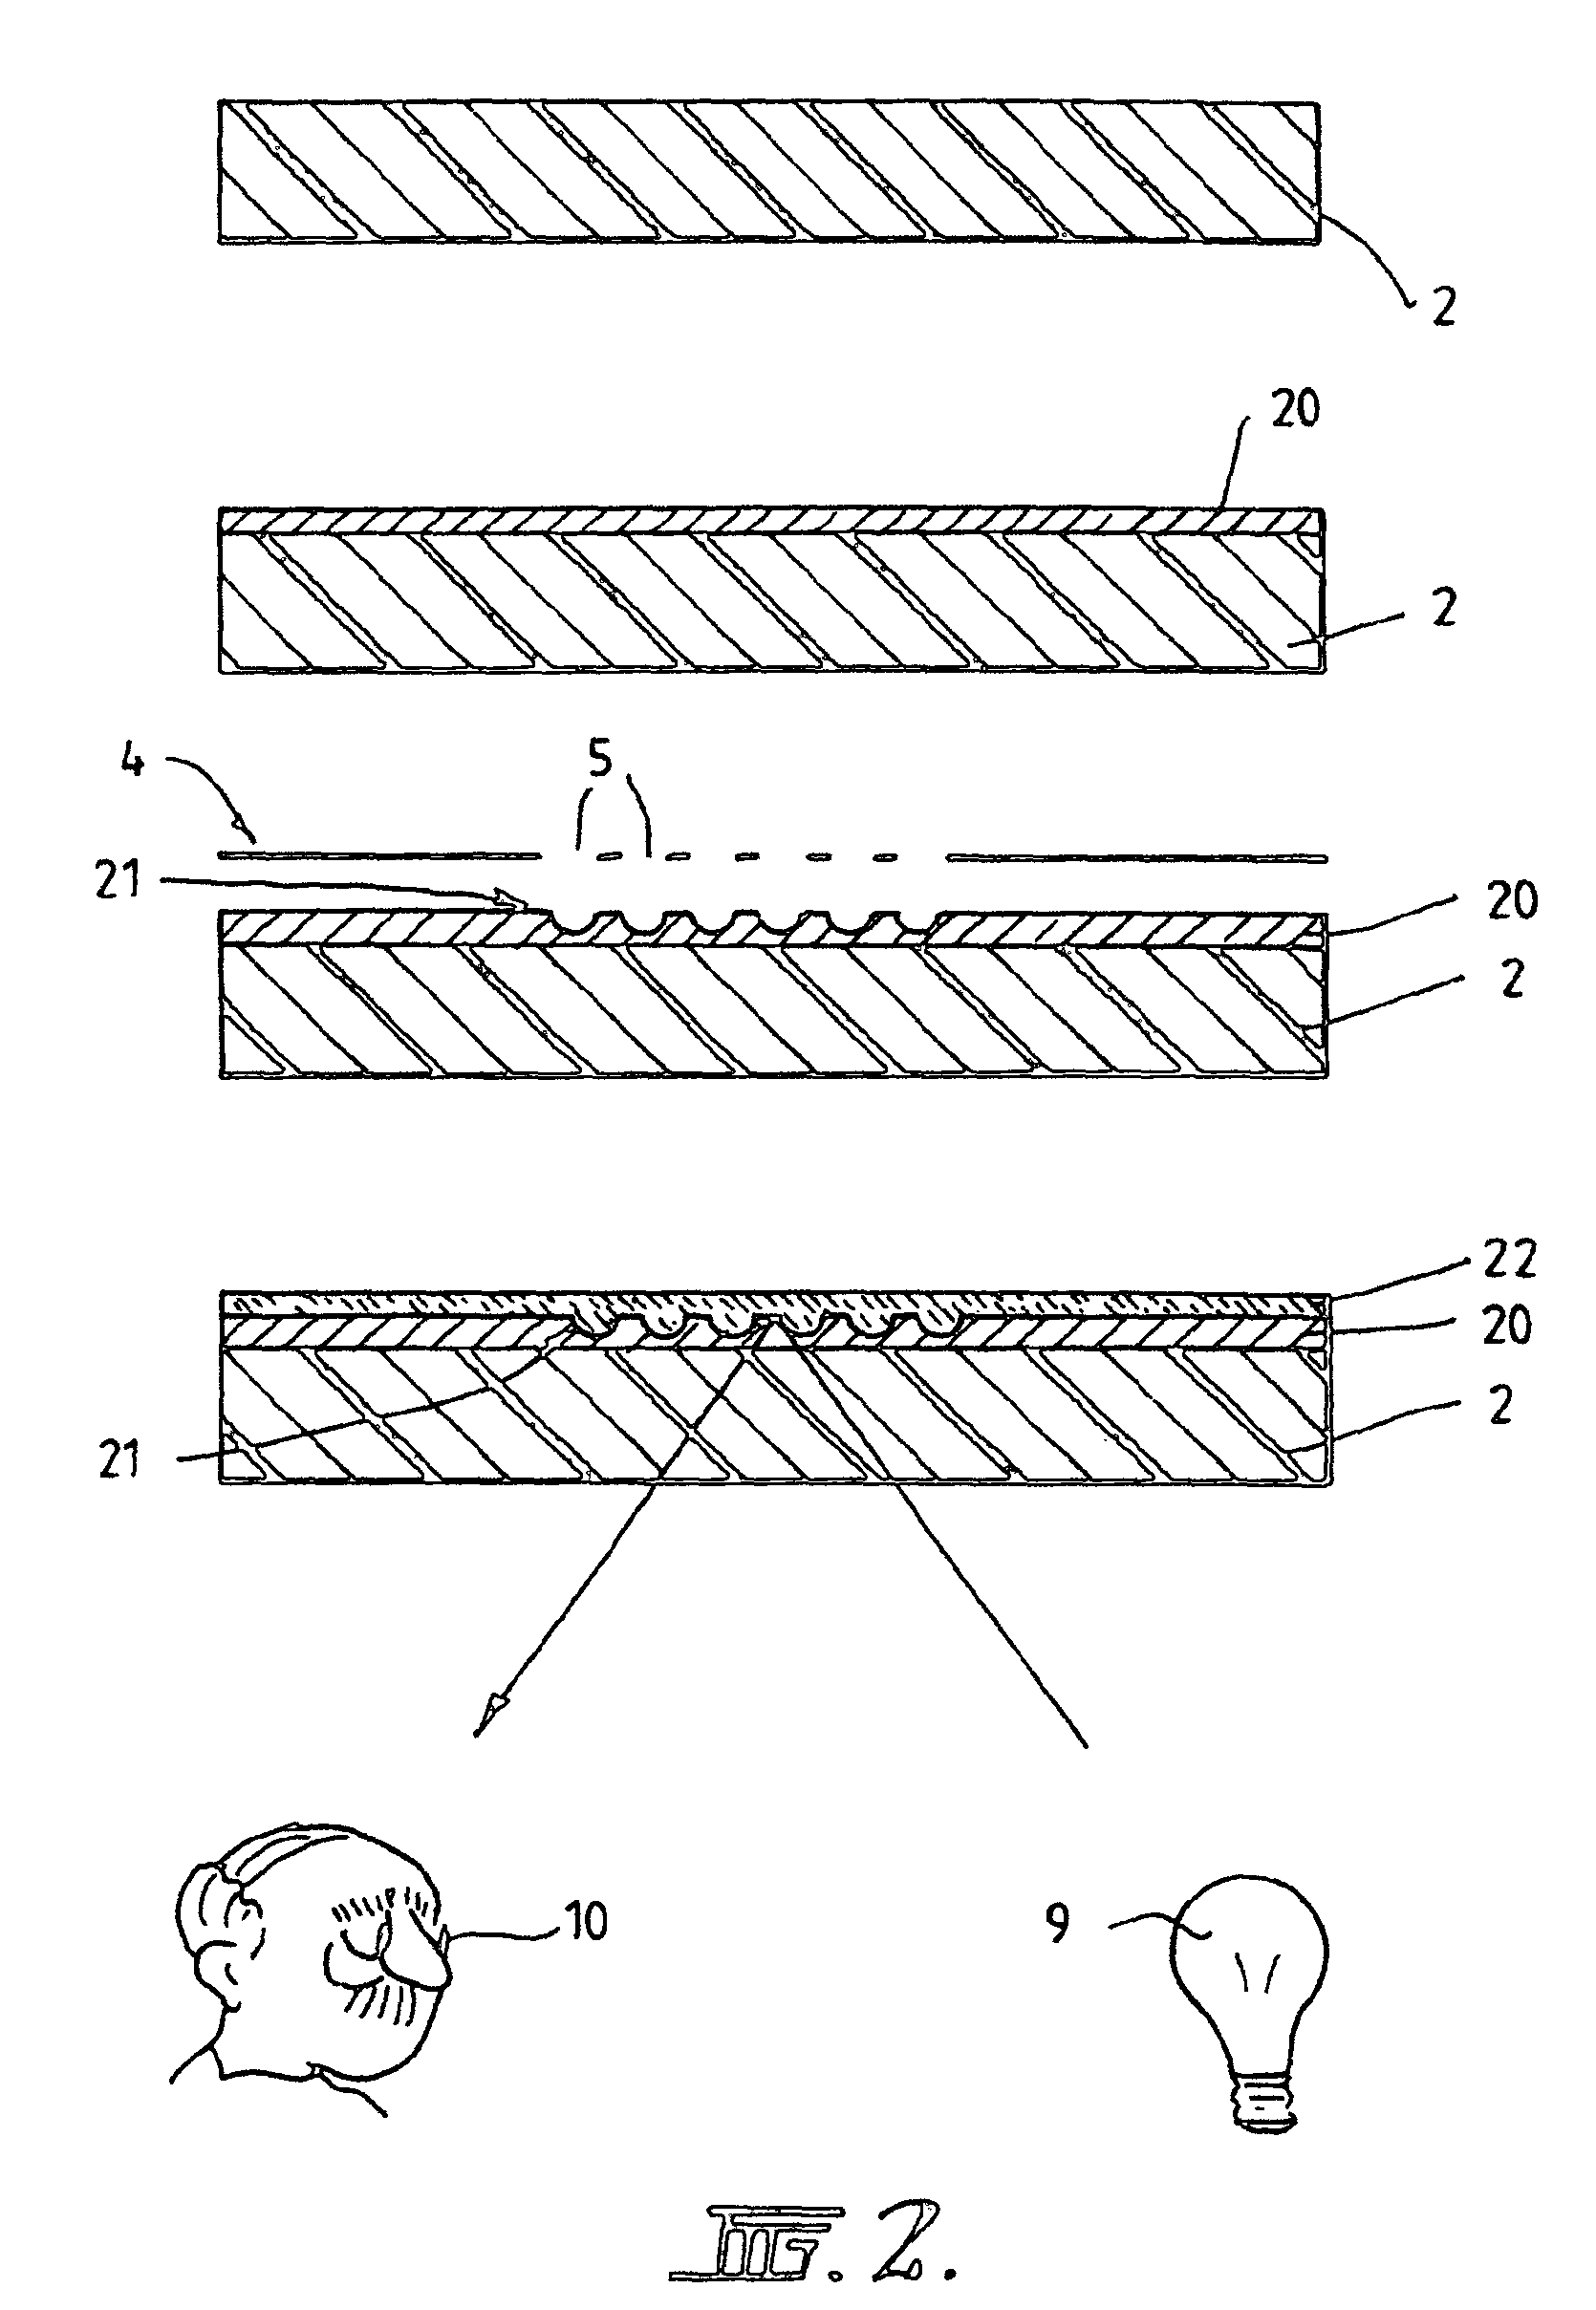 Methods of producing diffractive structures in security documents